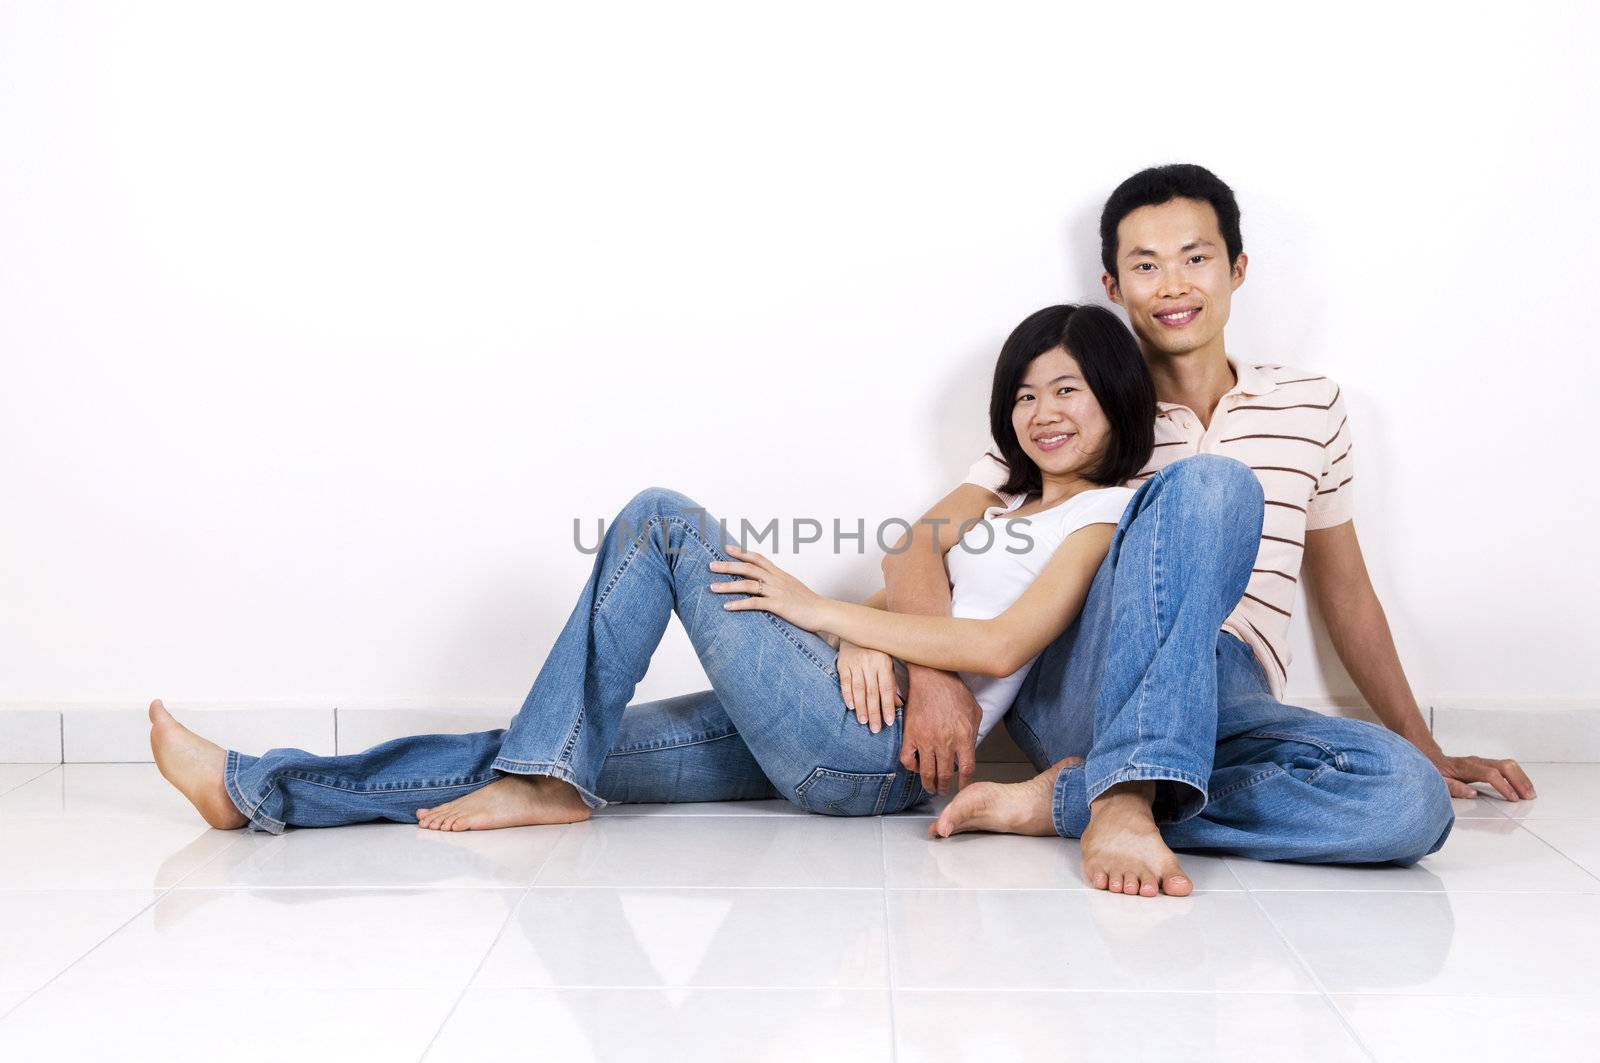 Young Asian adult couple sitting together on tiles floor in home smiling.